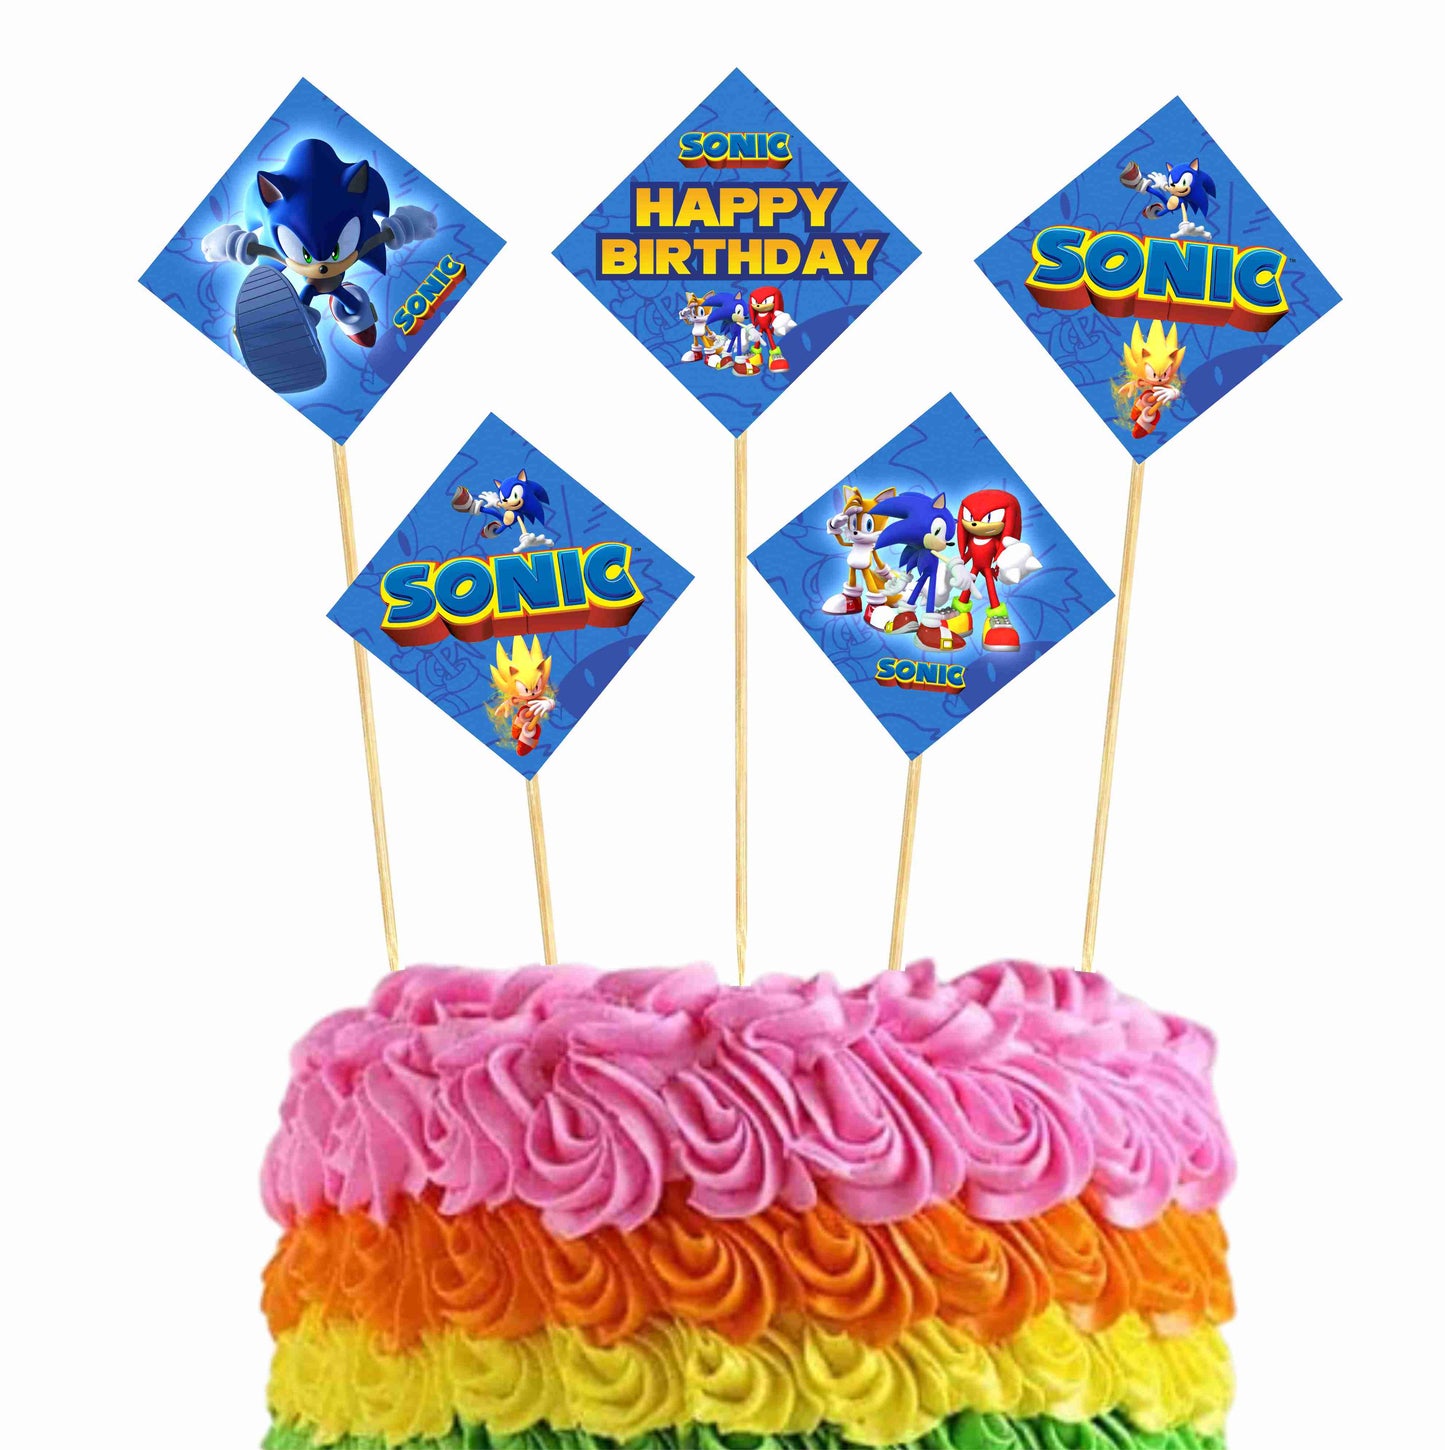 Sonic Theme Cake Topper Pack of 10 Nos for Birthday Cake Decoration Theme Party Item For Boys Girls Adults Birthday Theme Decor